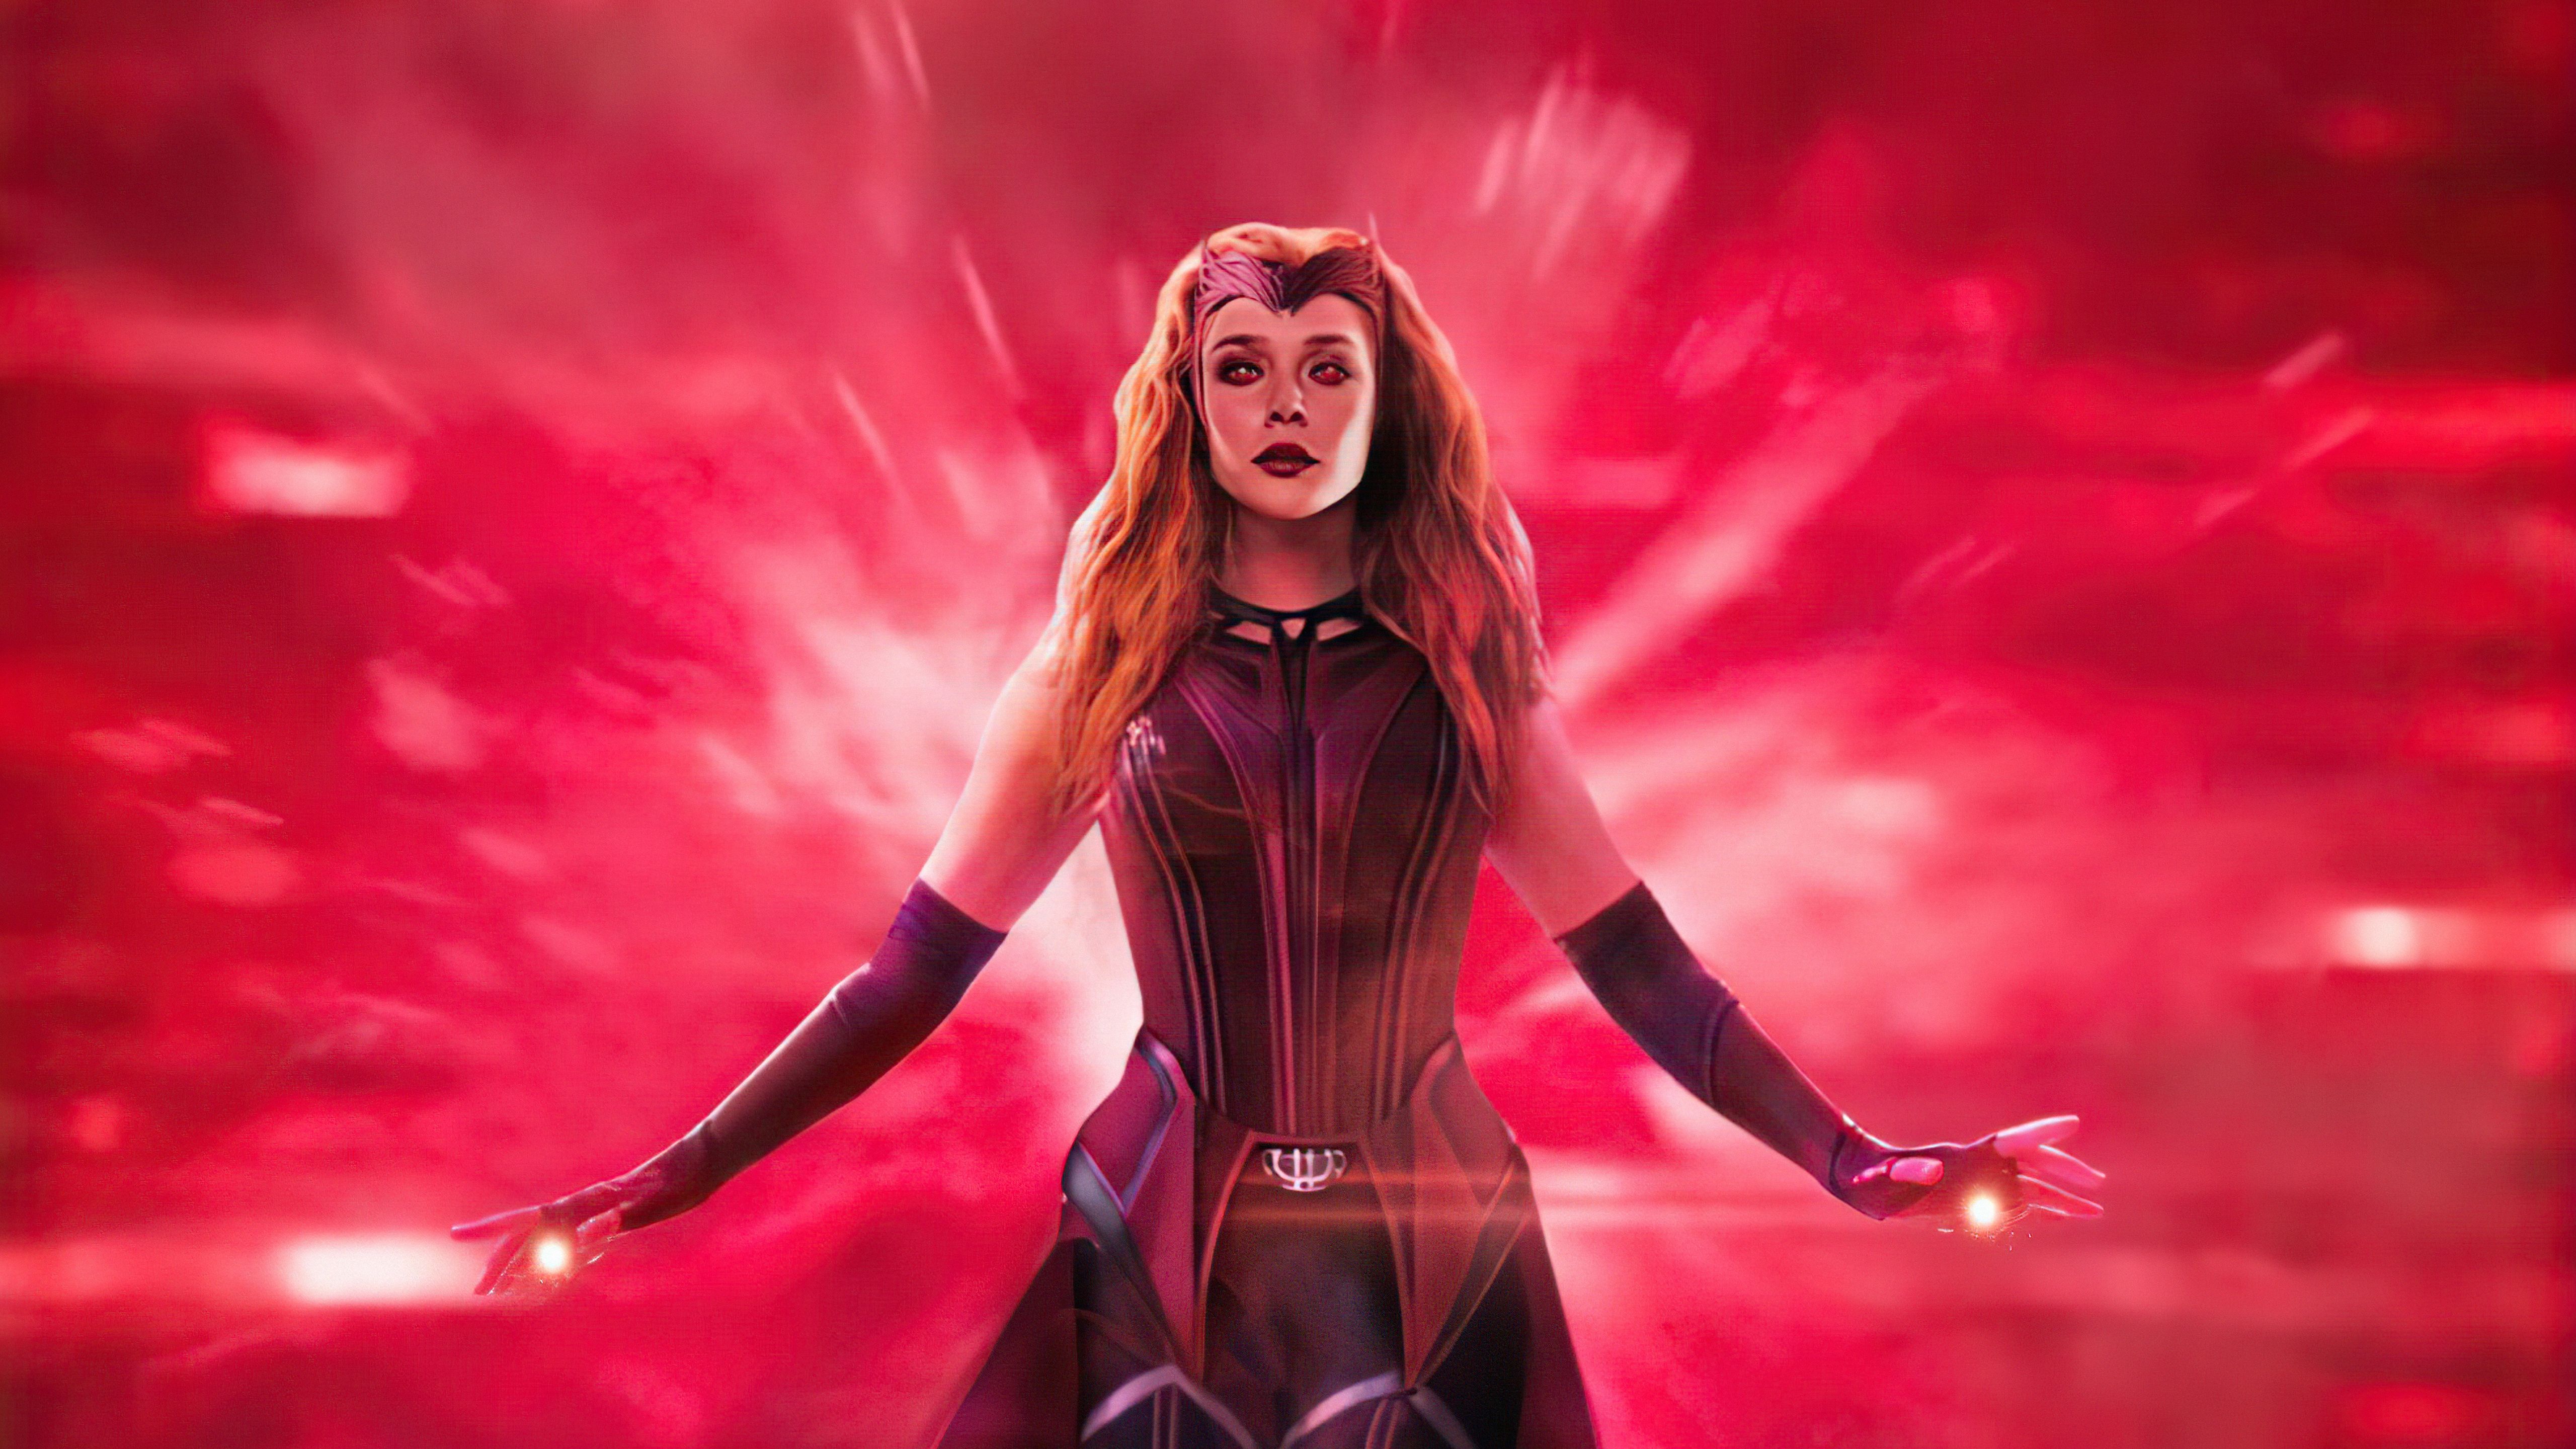 The Scarlet Witch Wallpaper Free The Scarlet Witch Background